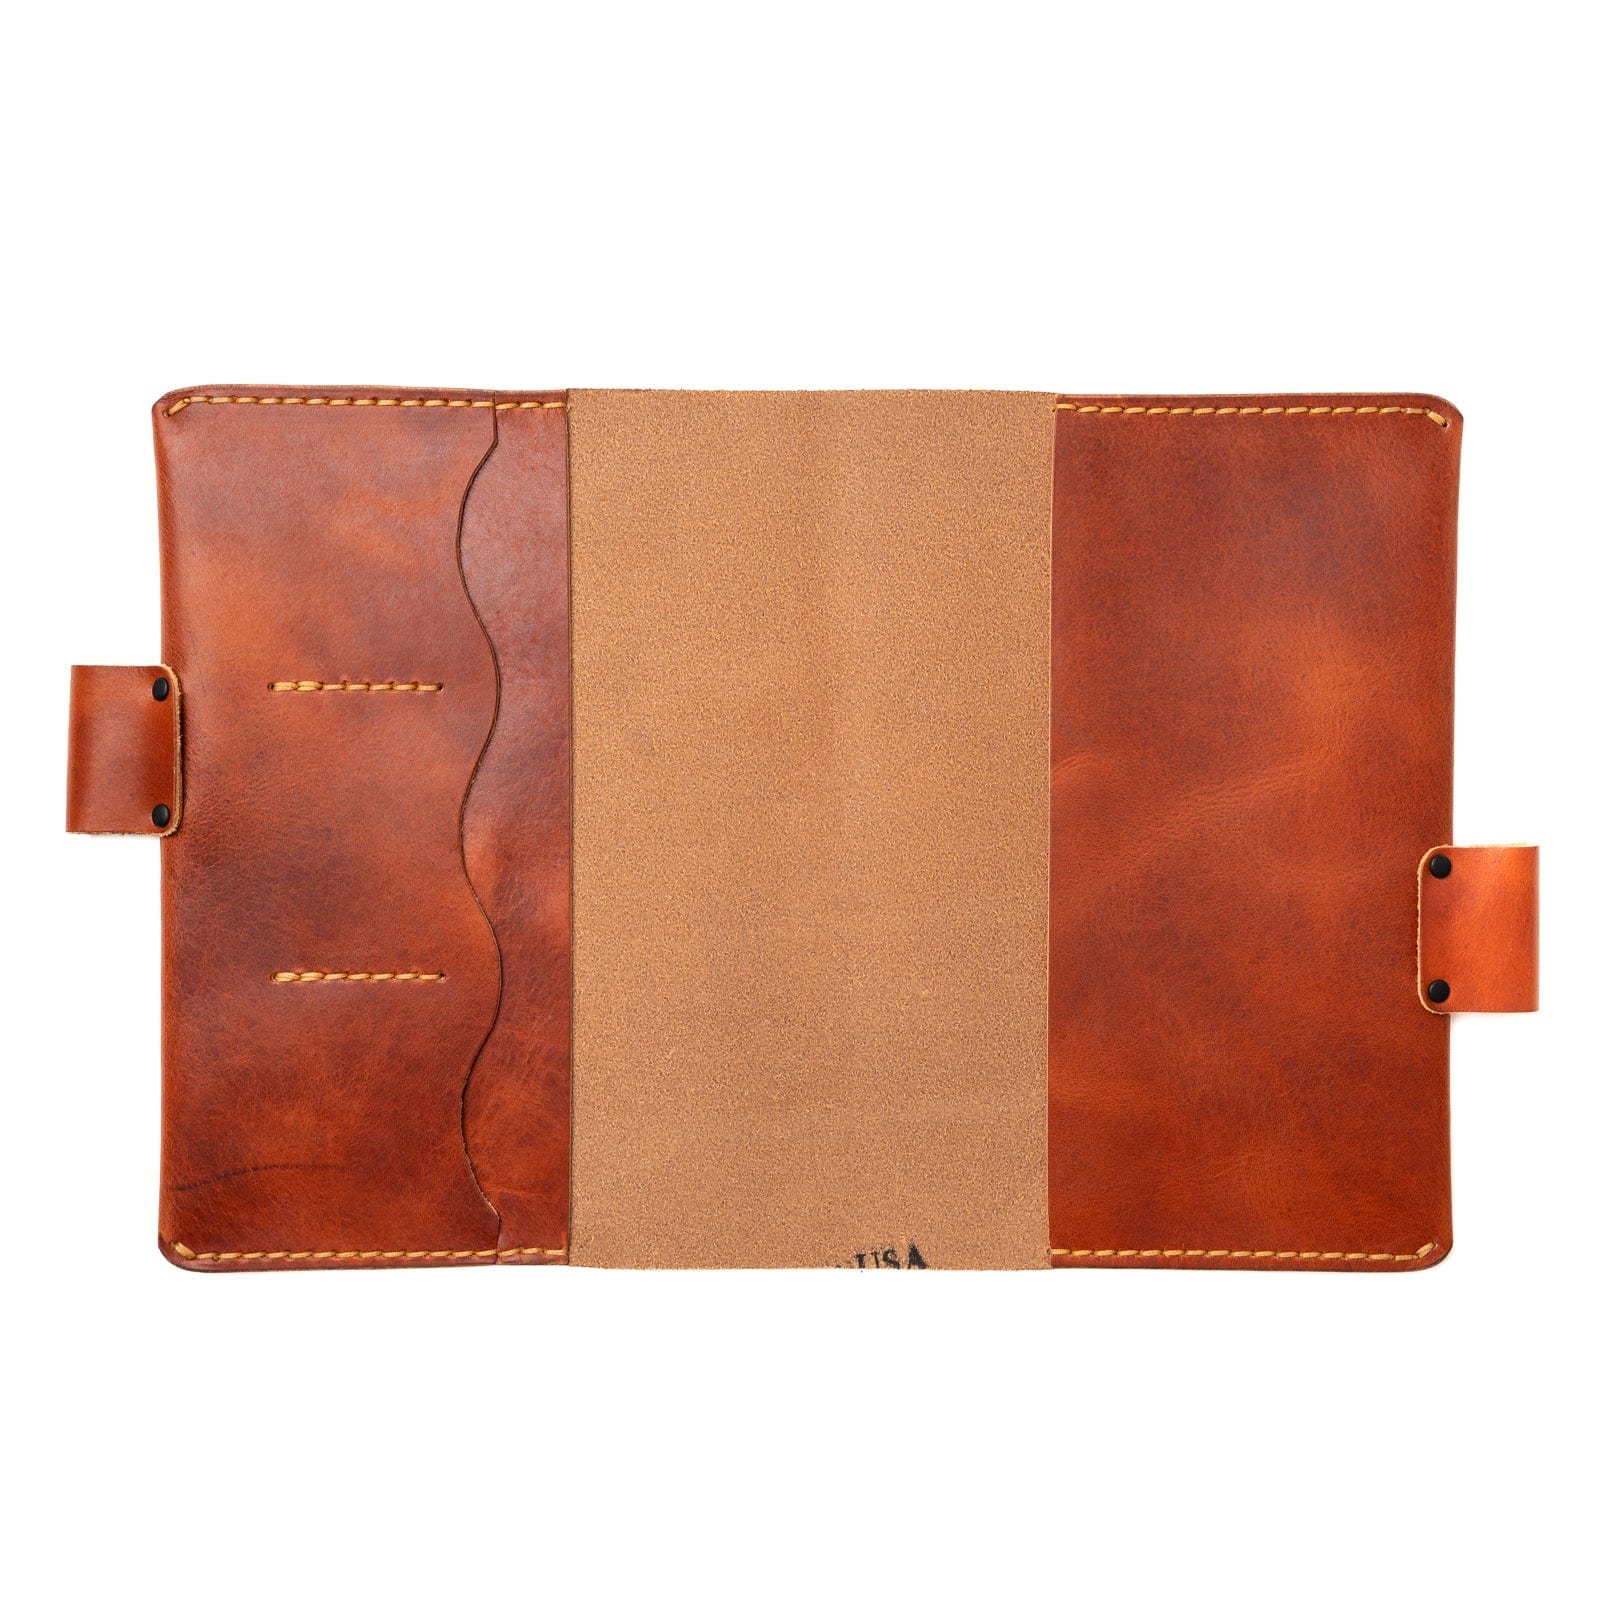 Leather A5 Notebook Cover - English Tan Popov Leather